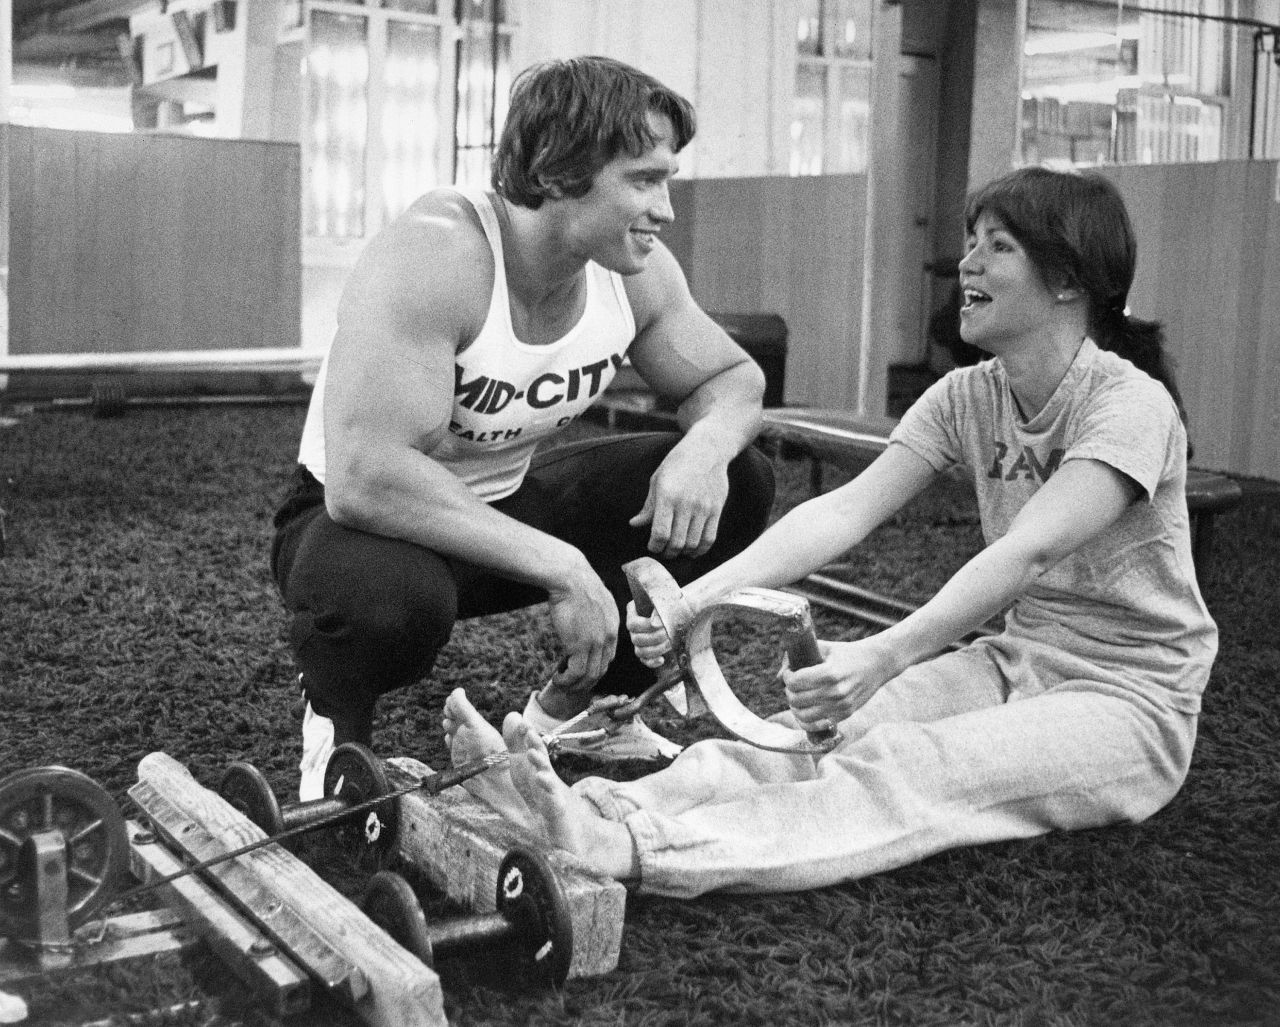 Field exercises on a row machine alongside Arnold Schwarzenegger in 1976. They began training together while working on the film "Stay Hungry."